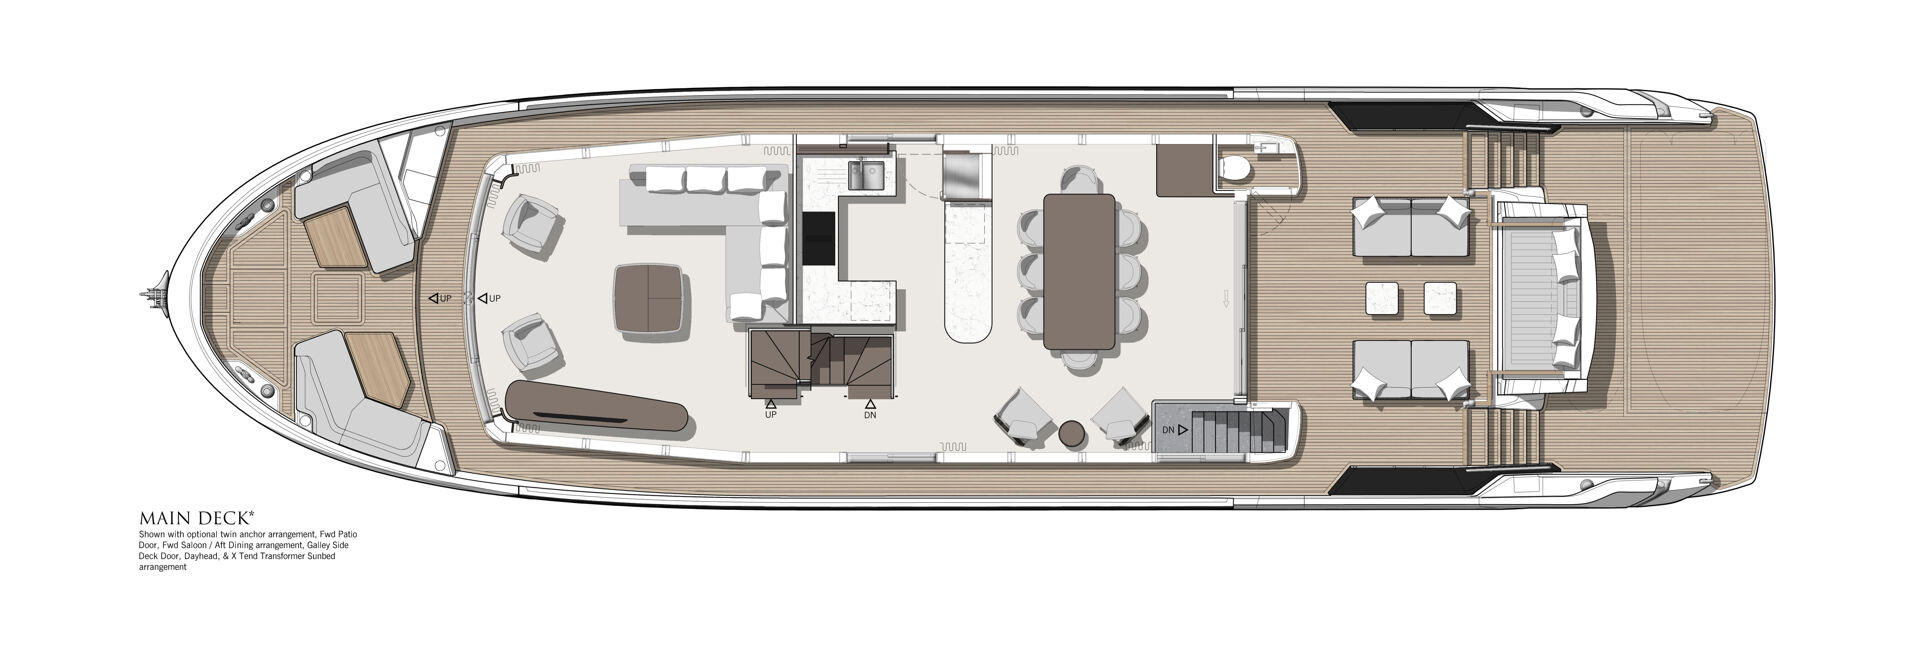 S267-00 - MAIN DECK - AFT DINING OPT ISS0P2